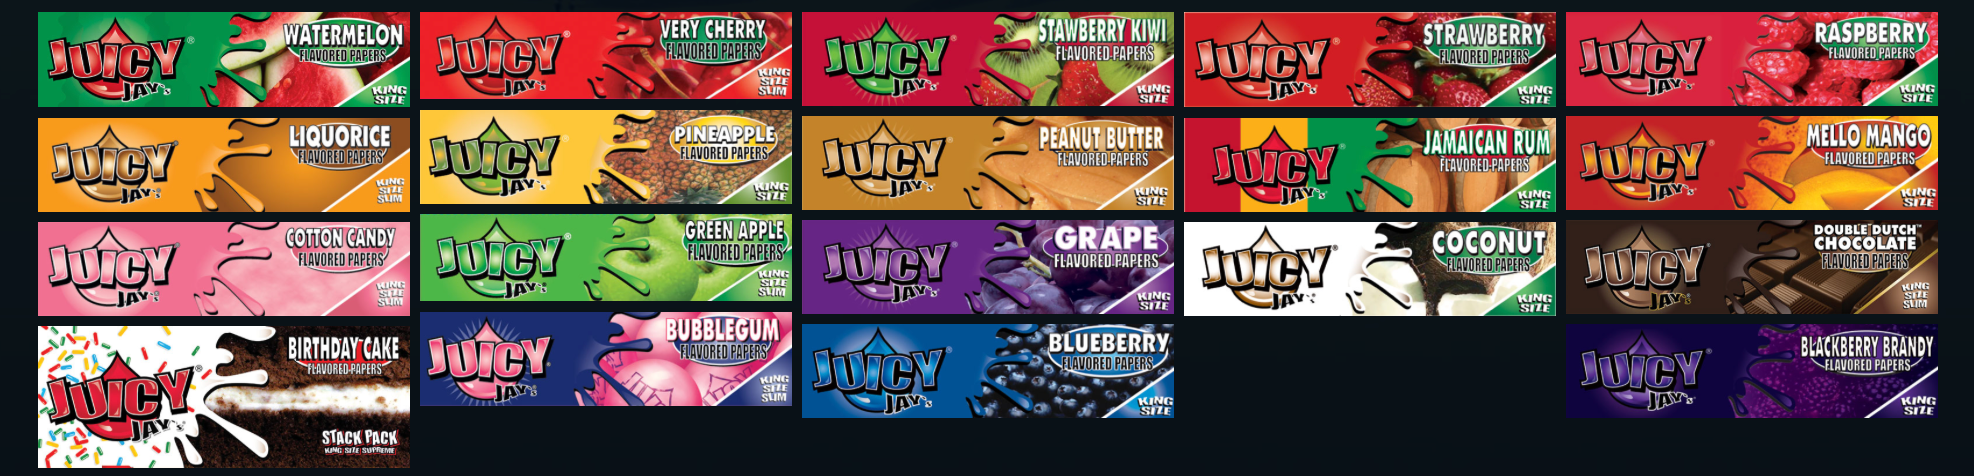 Juicy Jay's Flavored Papers (King Size)